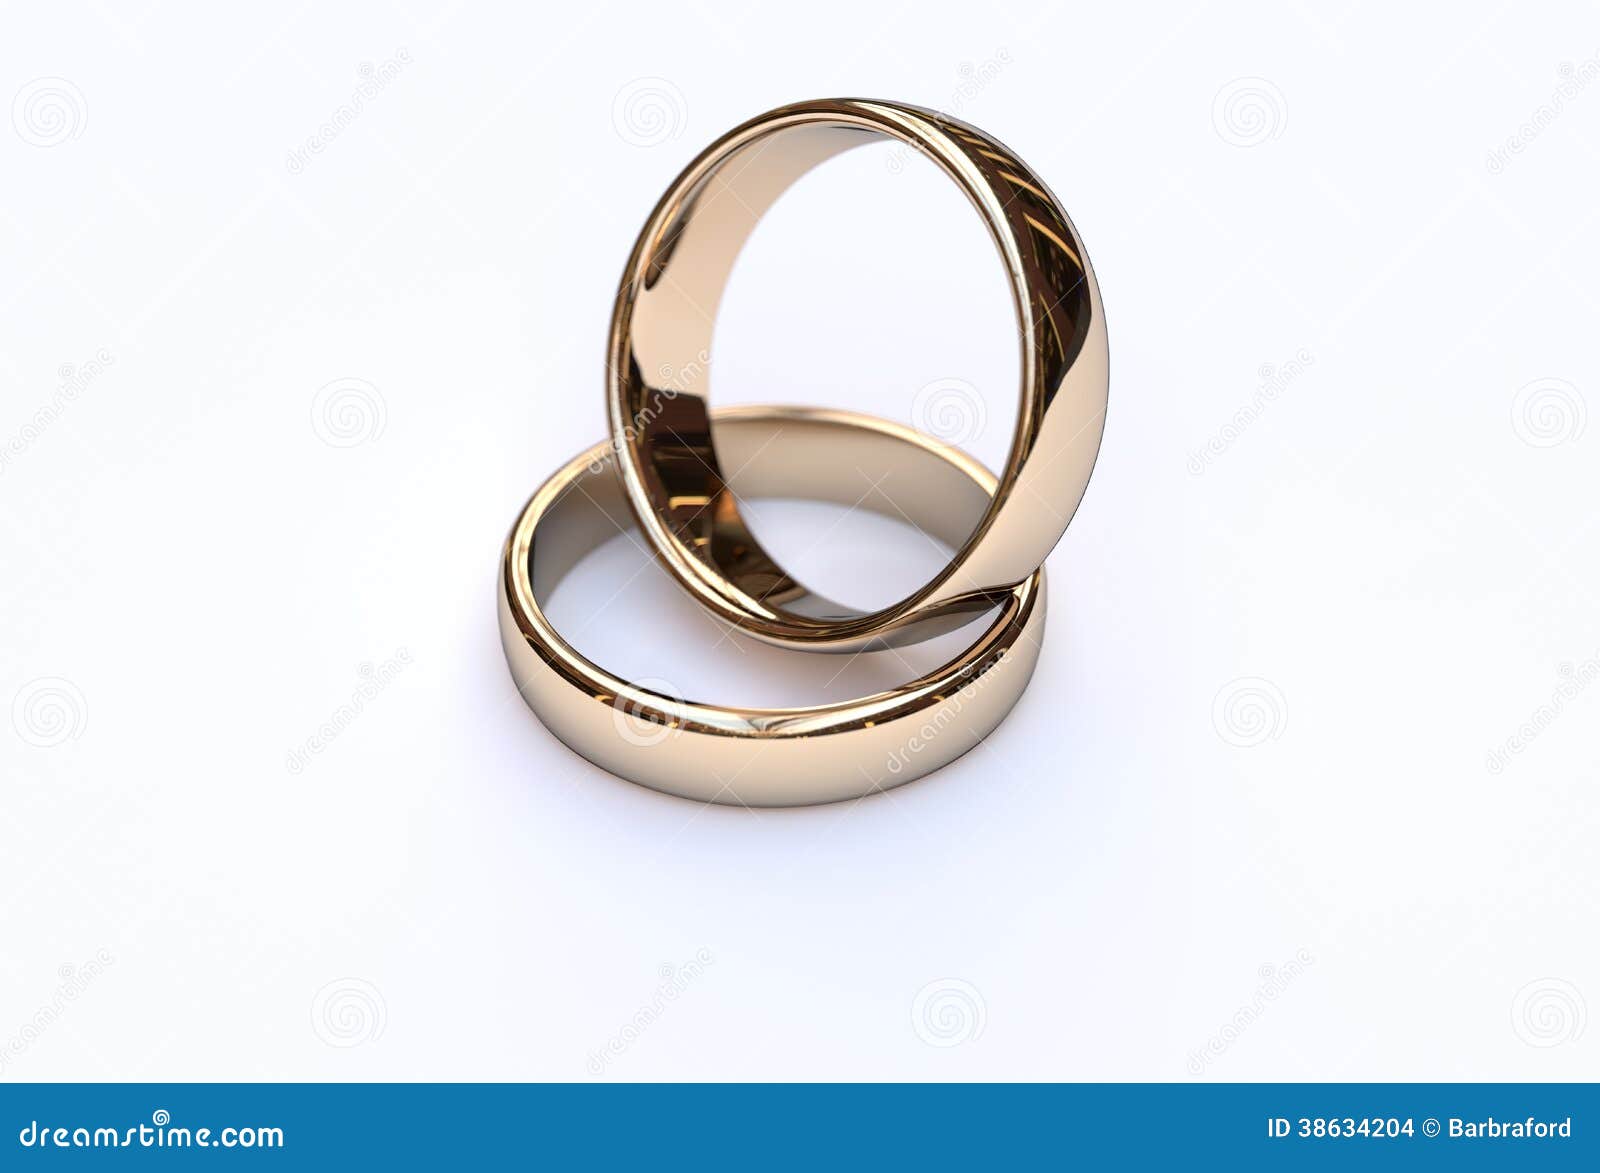 Golden wedding rings on white background, close up.